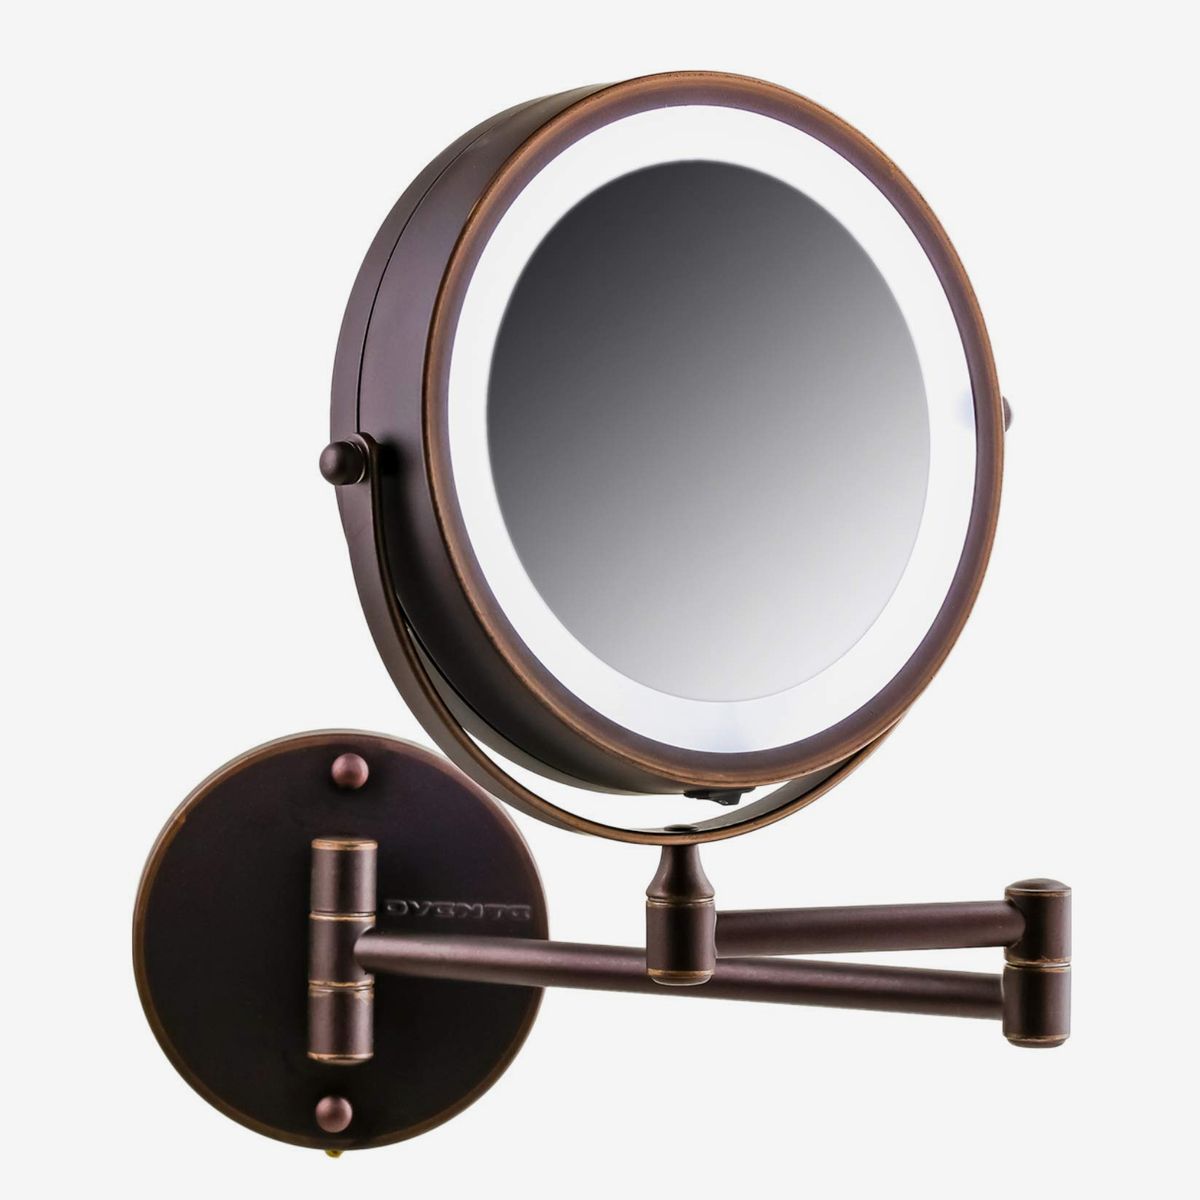 14 Best Lighted Makeup Mirrors 2021, 10x Magnifying Makeup Mirror Wall Mount